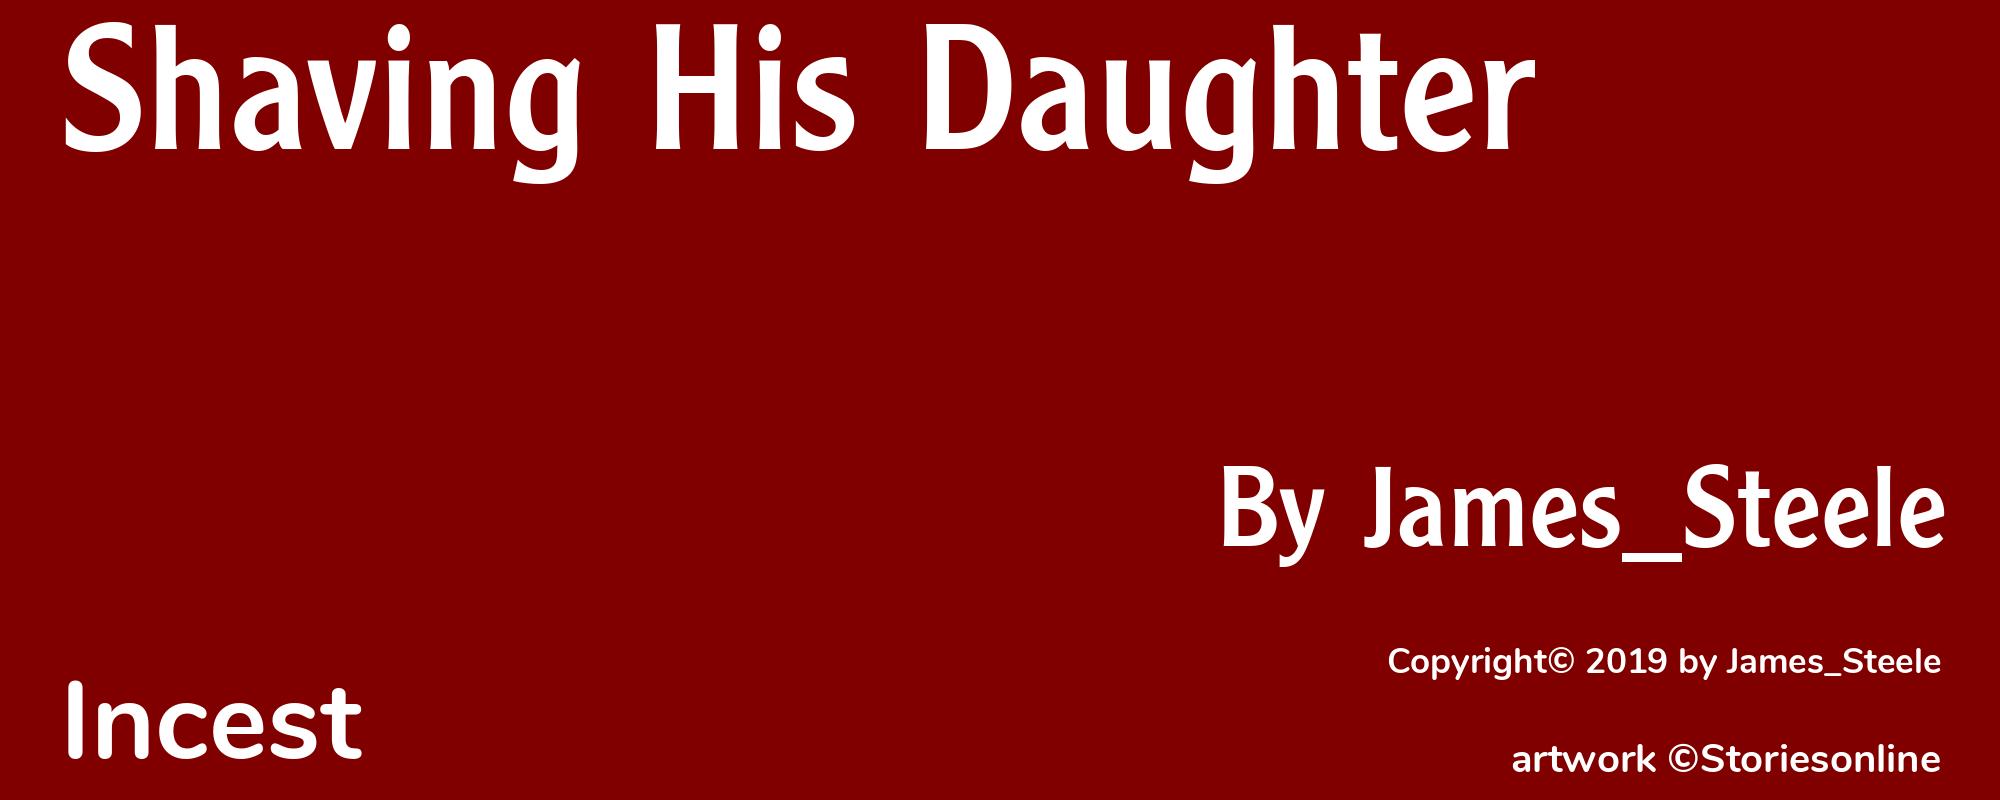 Shaving His Daughter - Cover